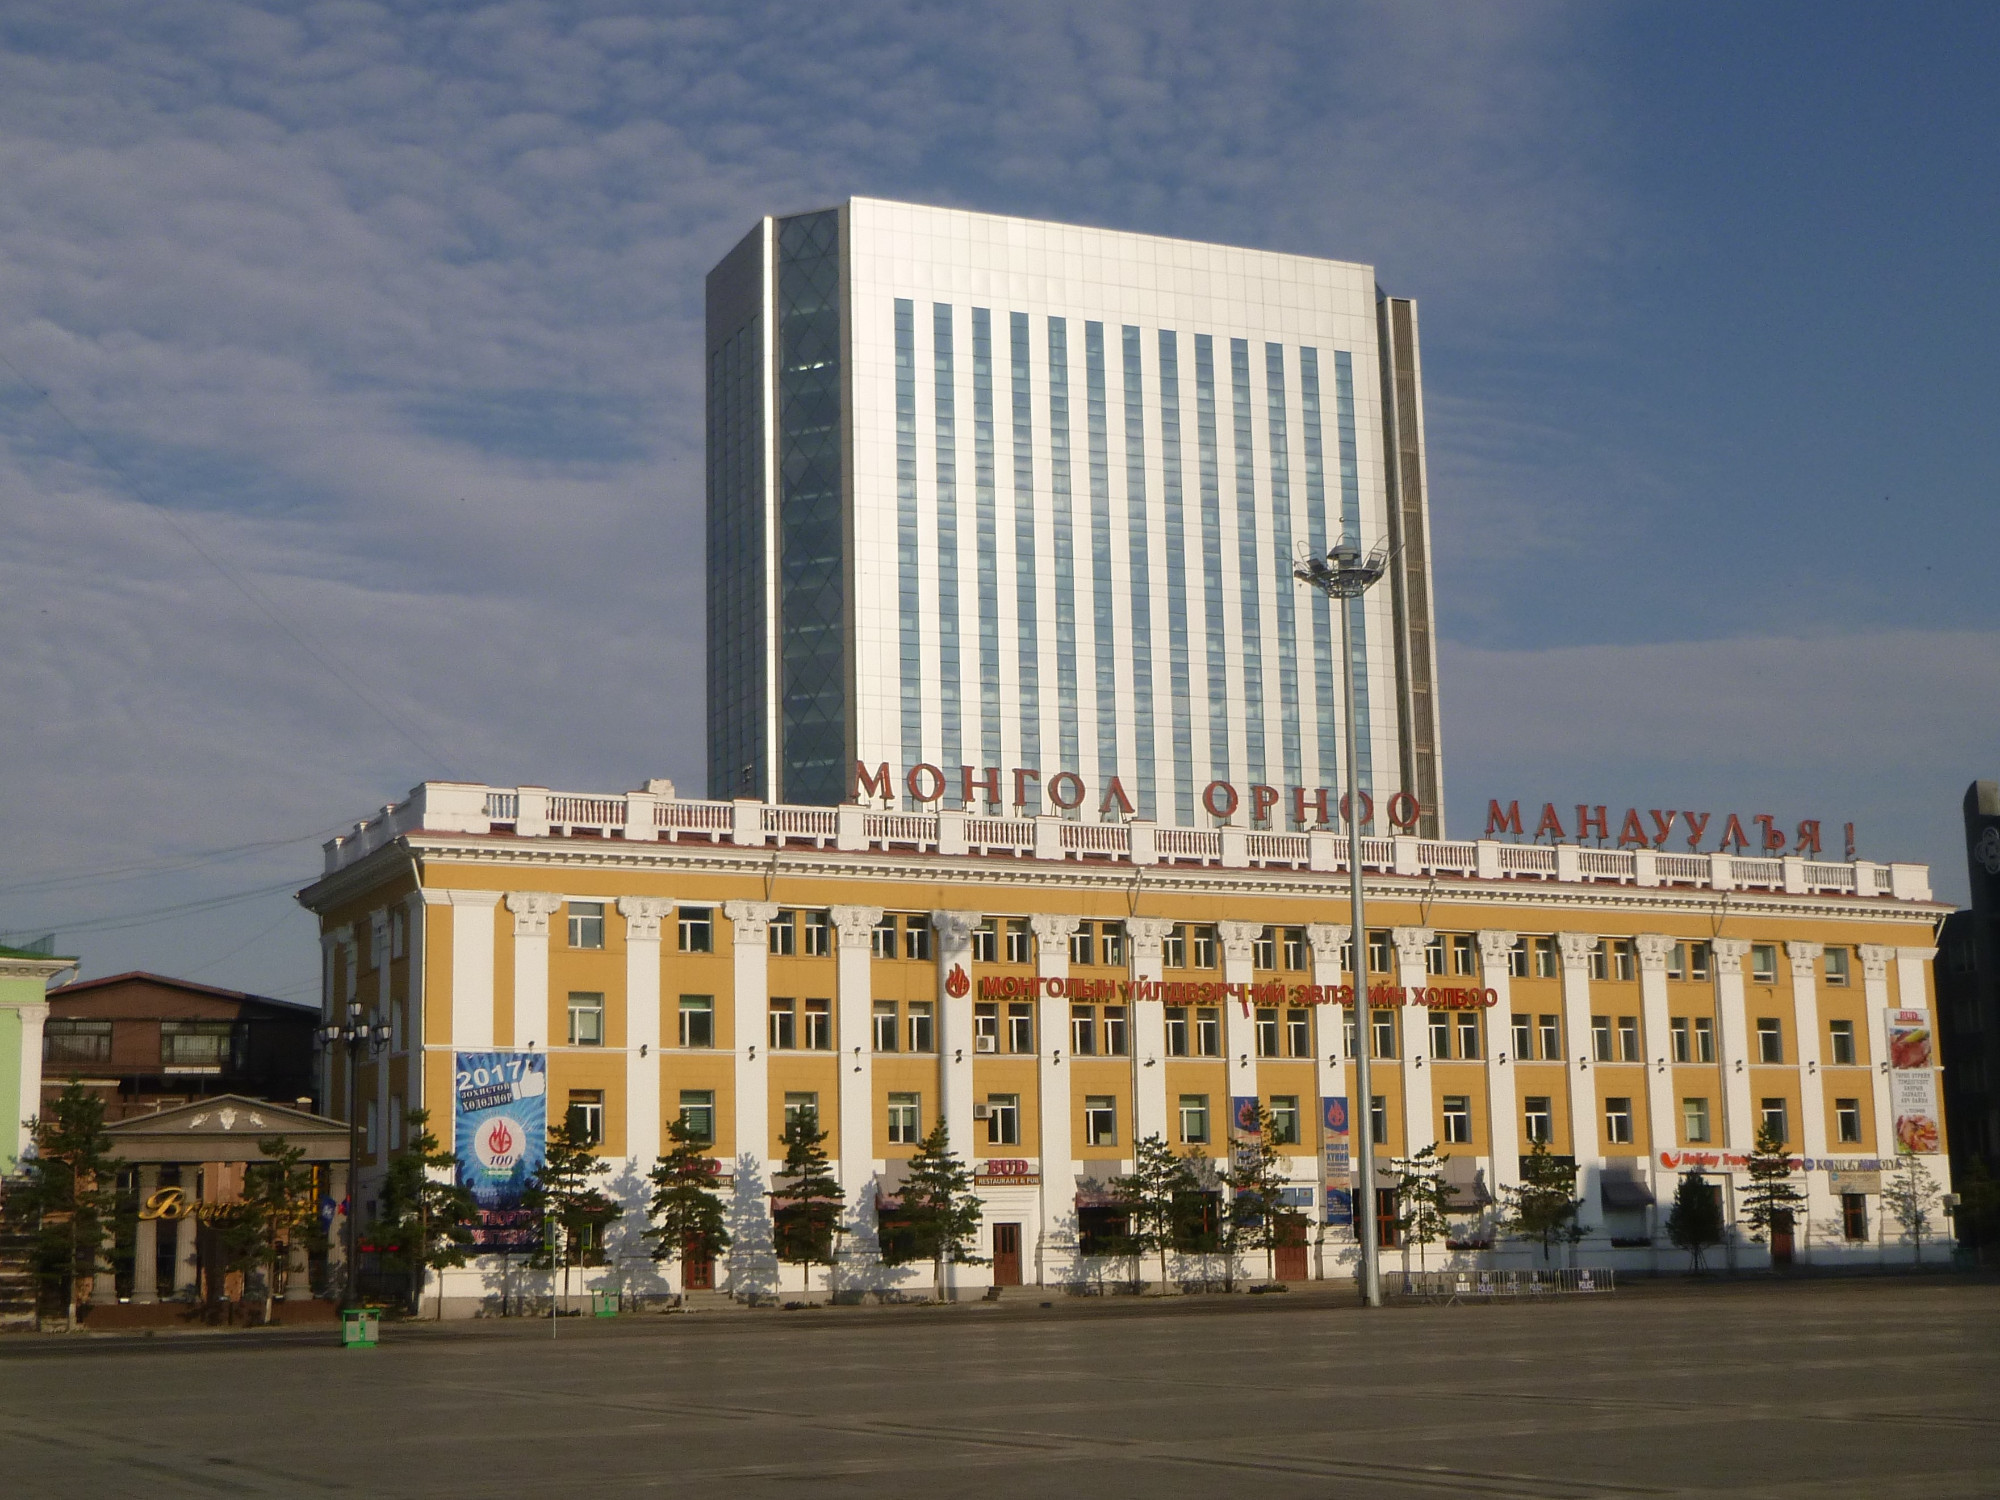 Confederation of Mongolian trade unions Building